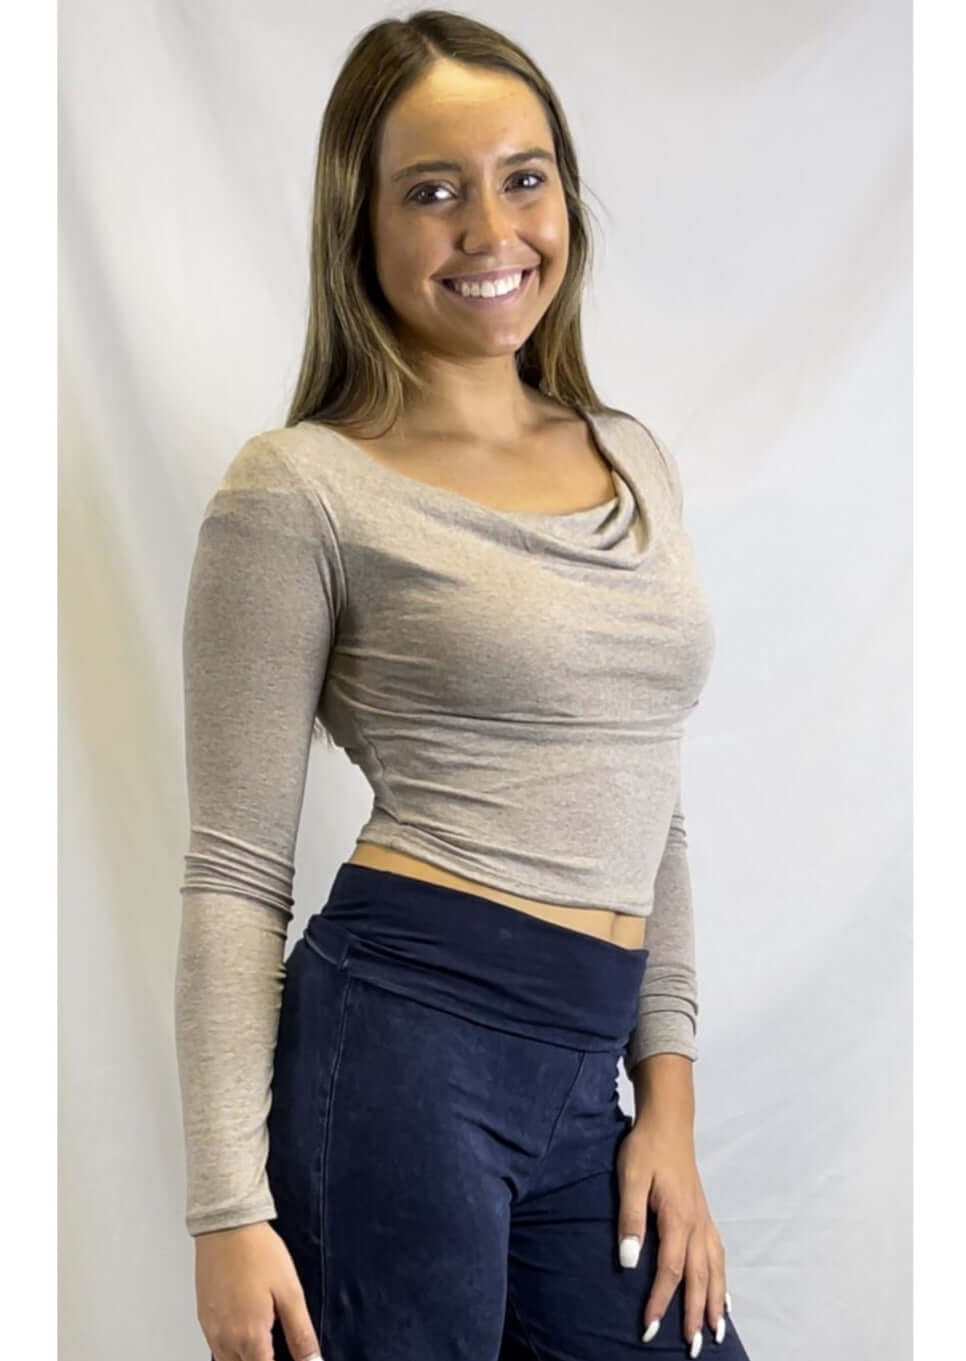 USA Made Women's Very Lightweight Cowl Neck Long Sleeves Cropped Top in Soft Mocha Color | Perfect for Gen Z and Millennials